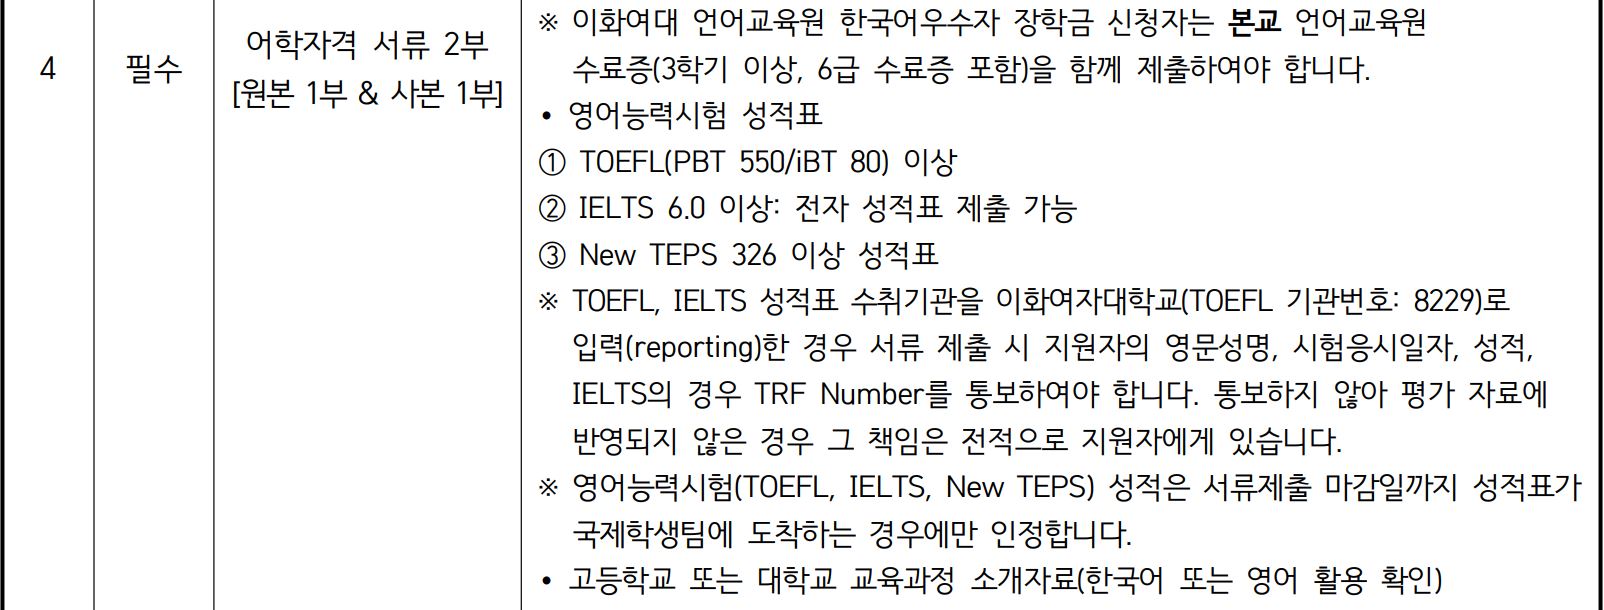 Ewha Womans University Foreign Student Admission Required Documents_English Version 이화여대 외국인전형 제출서류_영어본_03_제출서류.JPG